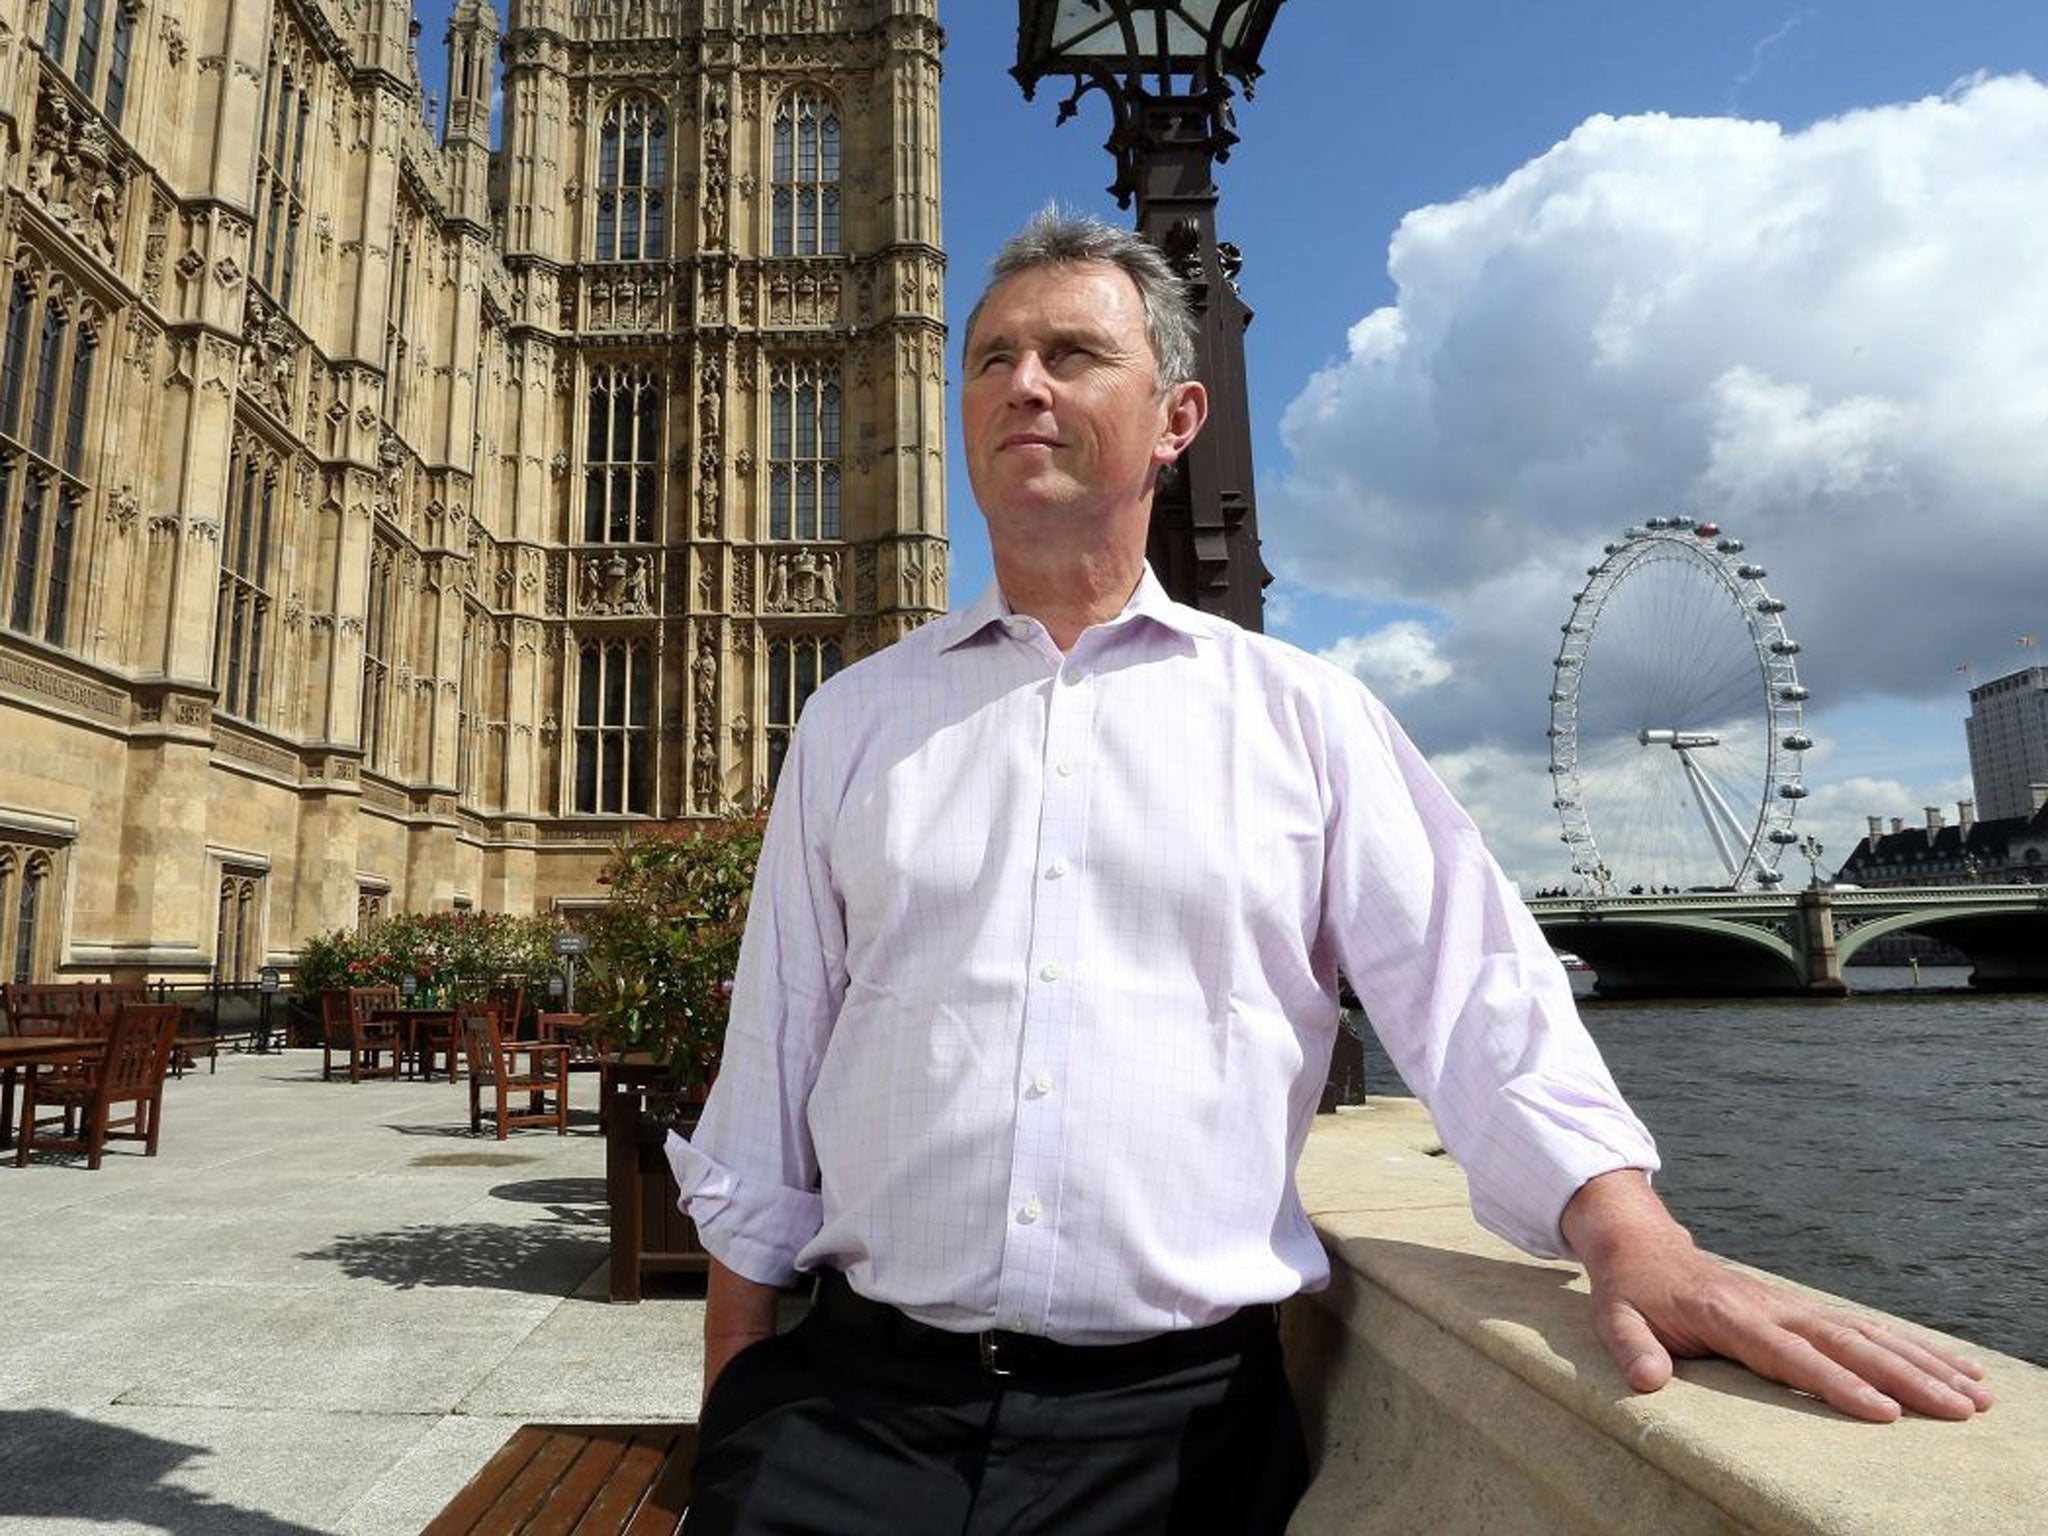 Nigel Evans, the Conservative MP for Ribble Valley and former Deputy Speaker, at the Houses of Parliament; he describes his arrest and trial as ‘traumatic’